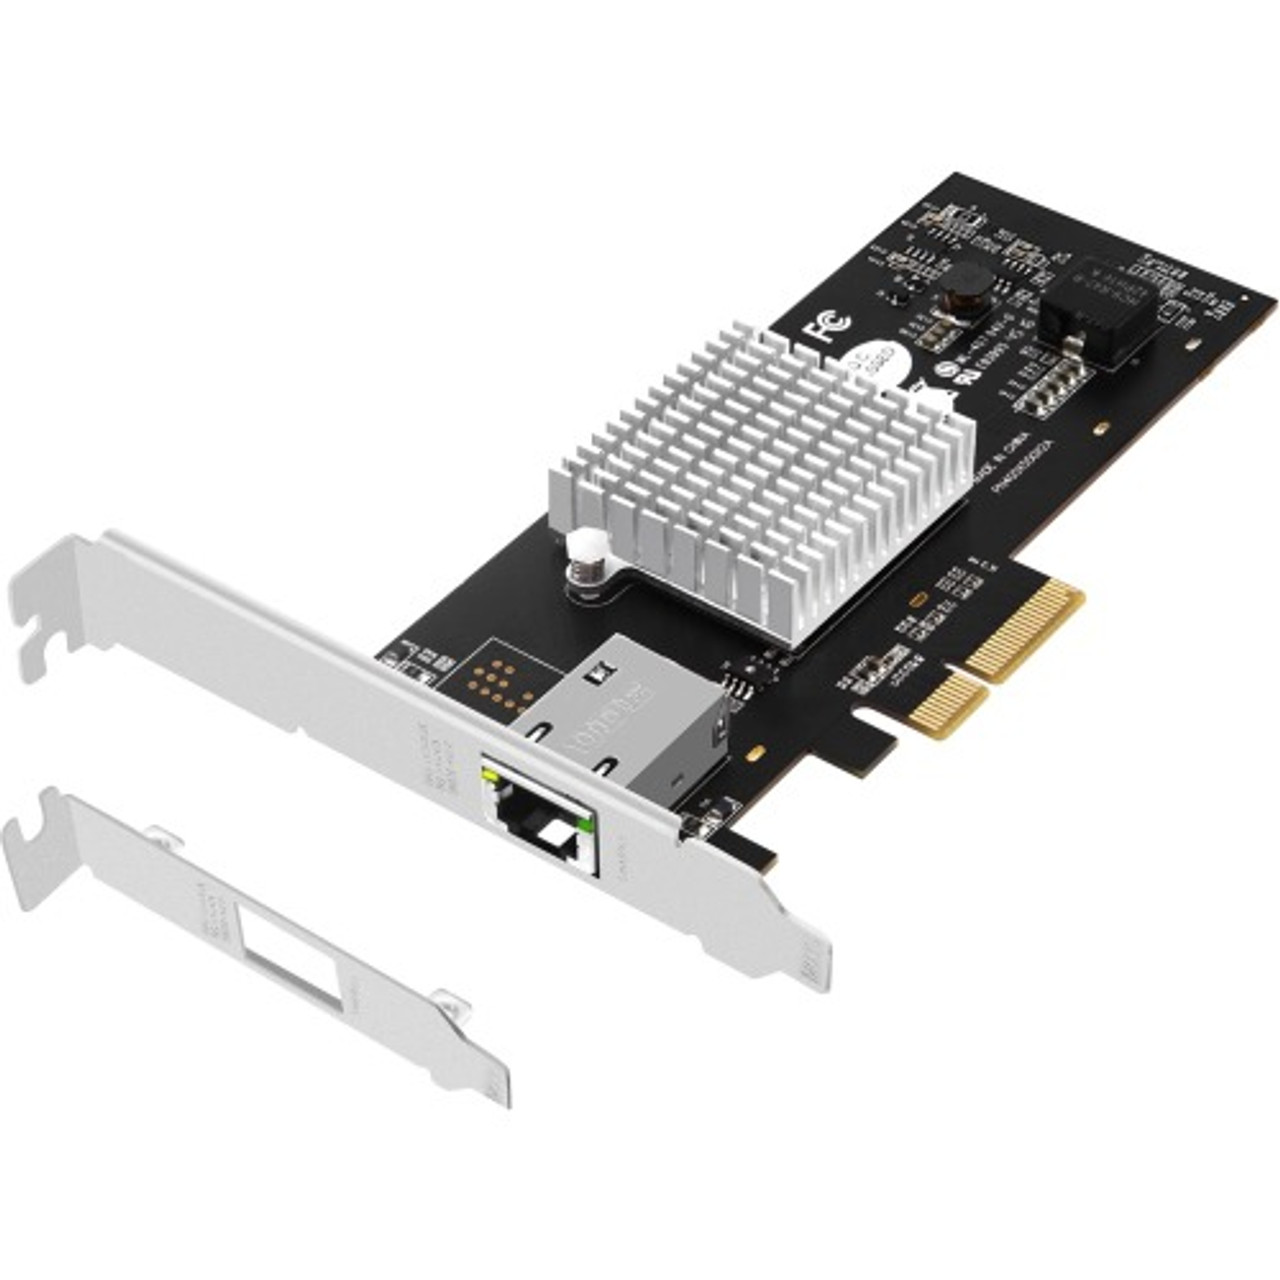 CN-GP1211-S1 SIIG Dual Profile 10G 5-Speed Multi-Gigabit Network Controller Card Intel X550 PCI Express 3.0 x4 1 Port(s) 1 Twisted Pair